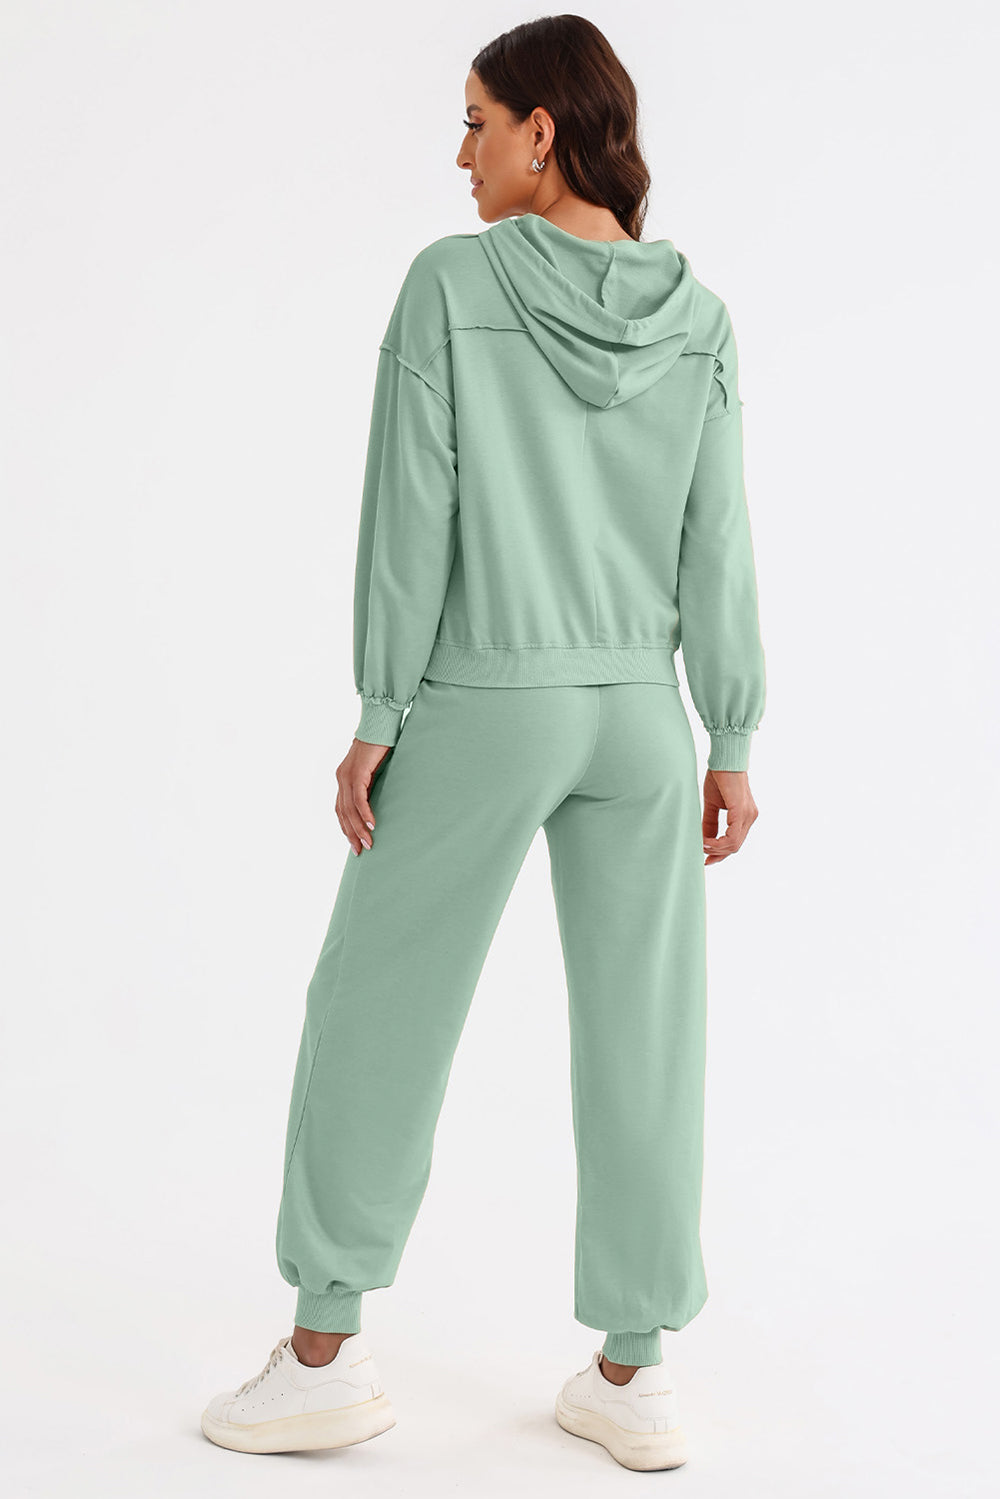 Get trendy with Cutout Drawstring Hoodie and Joggers Active Set - Activewear available at Styles Code. Grab yours today!